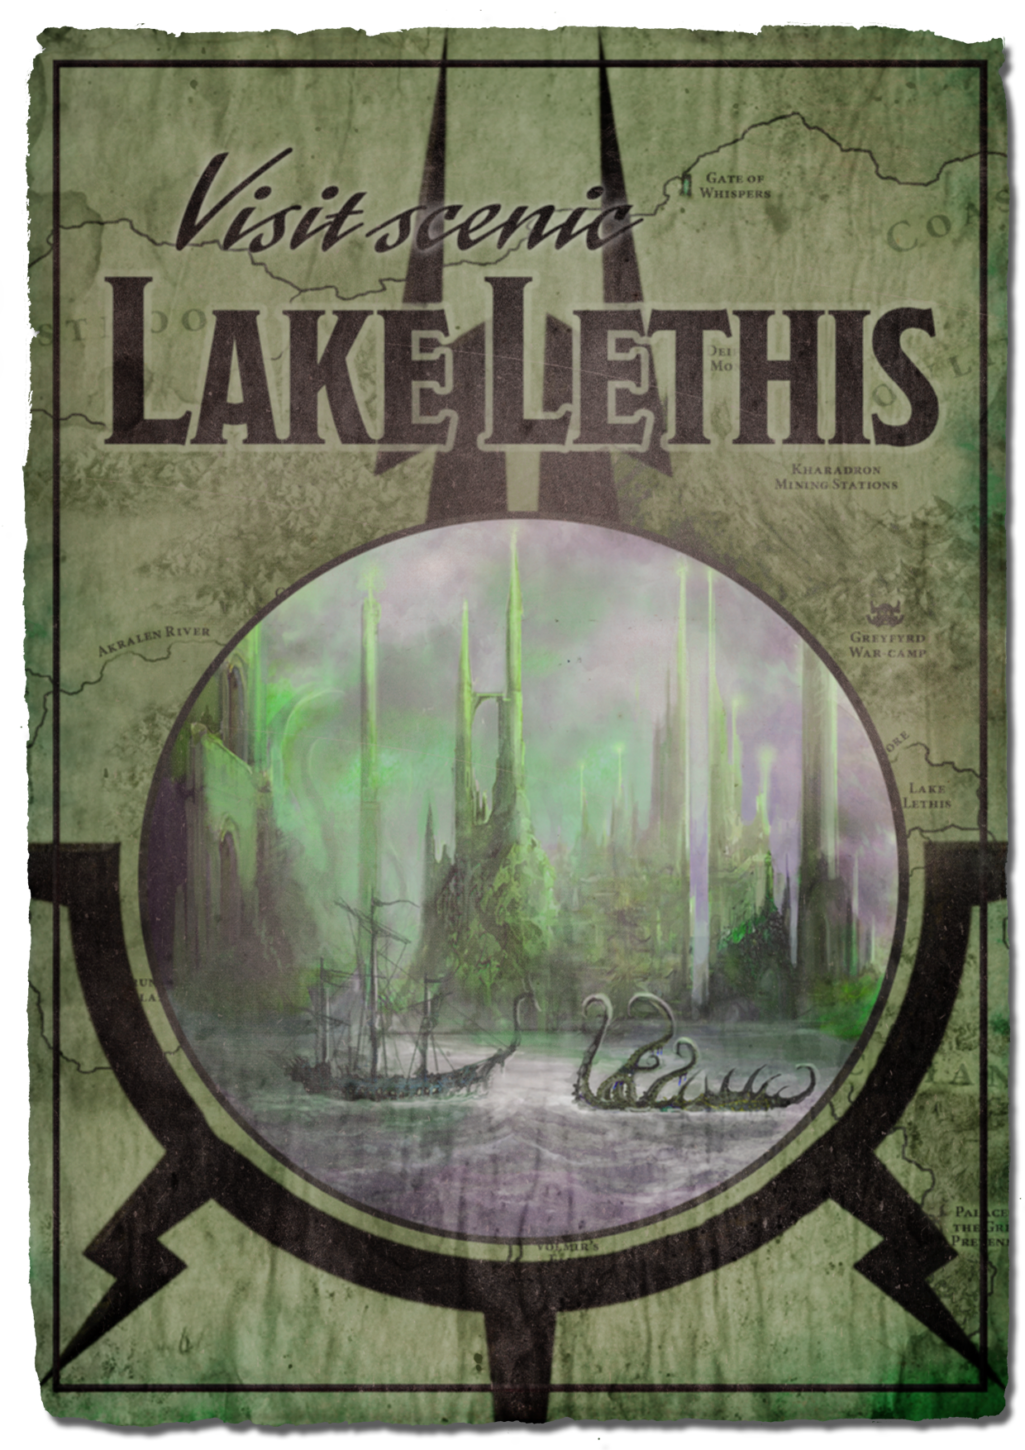 05-06-LakeLethis2-1025x1450.png